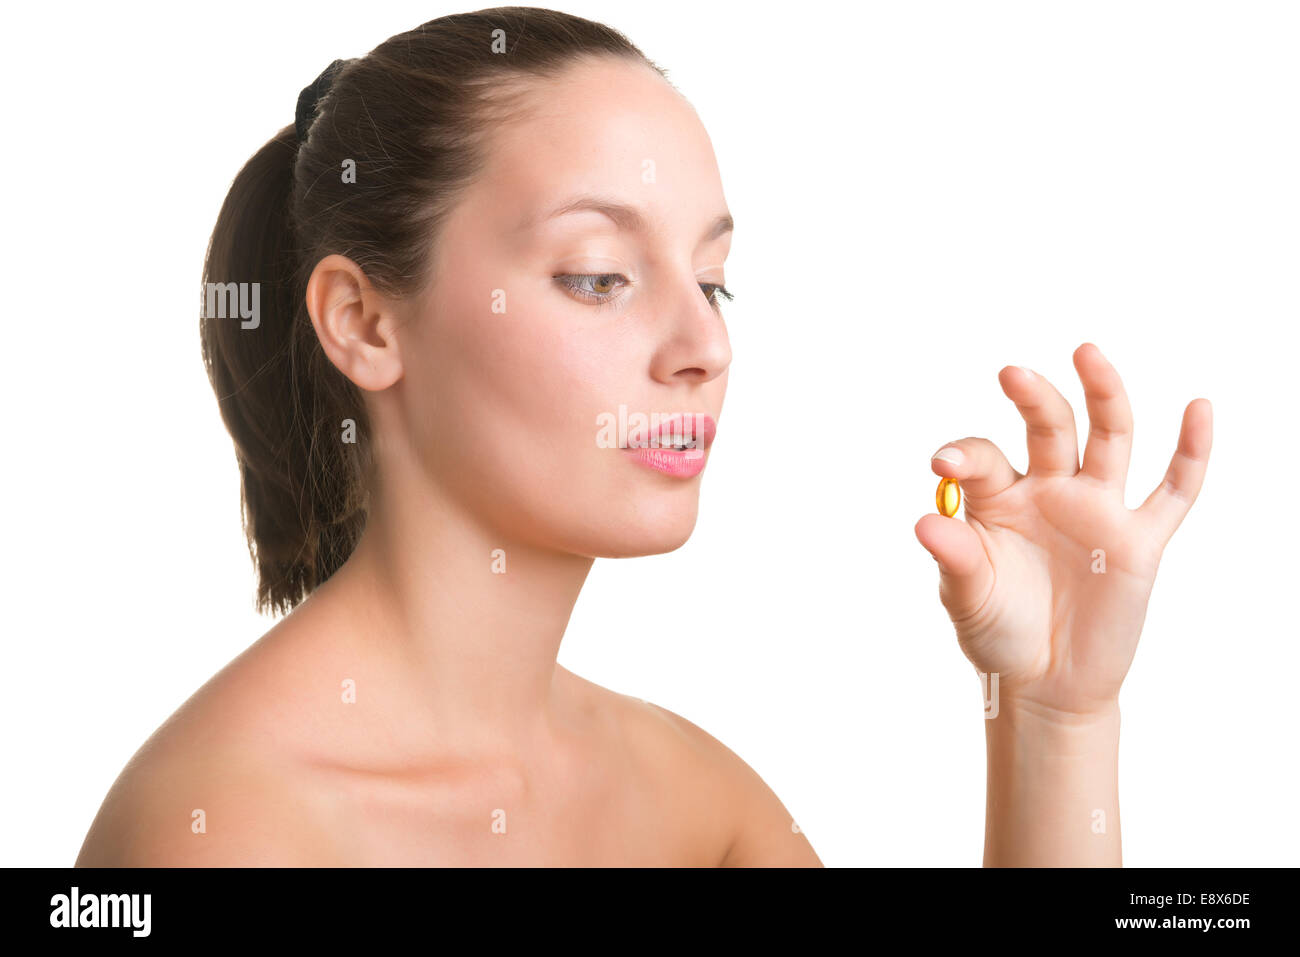 Woman about to take a pill, isolated in white Stock Photo